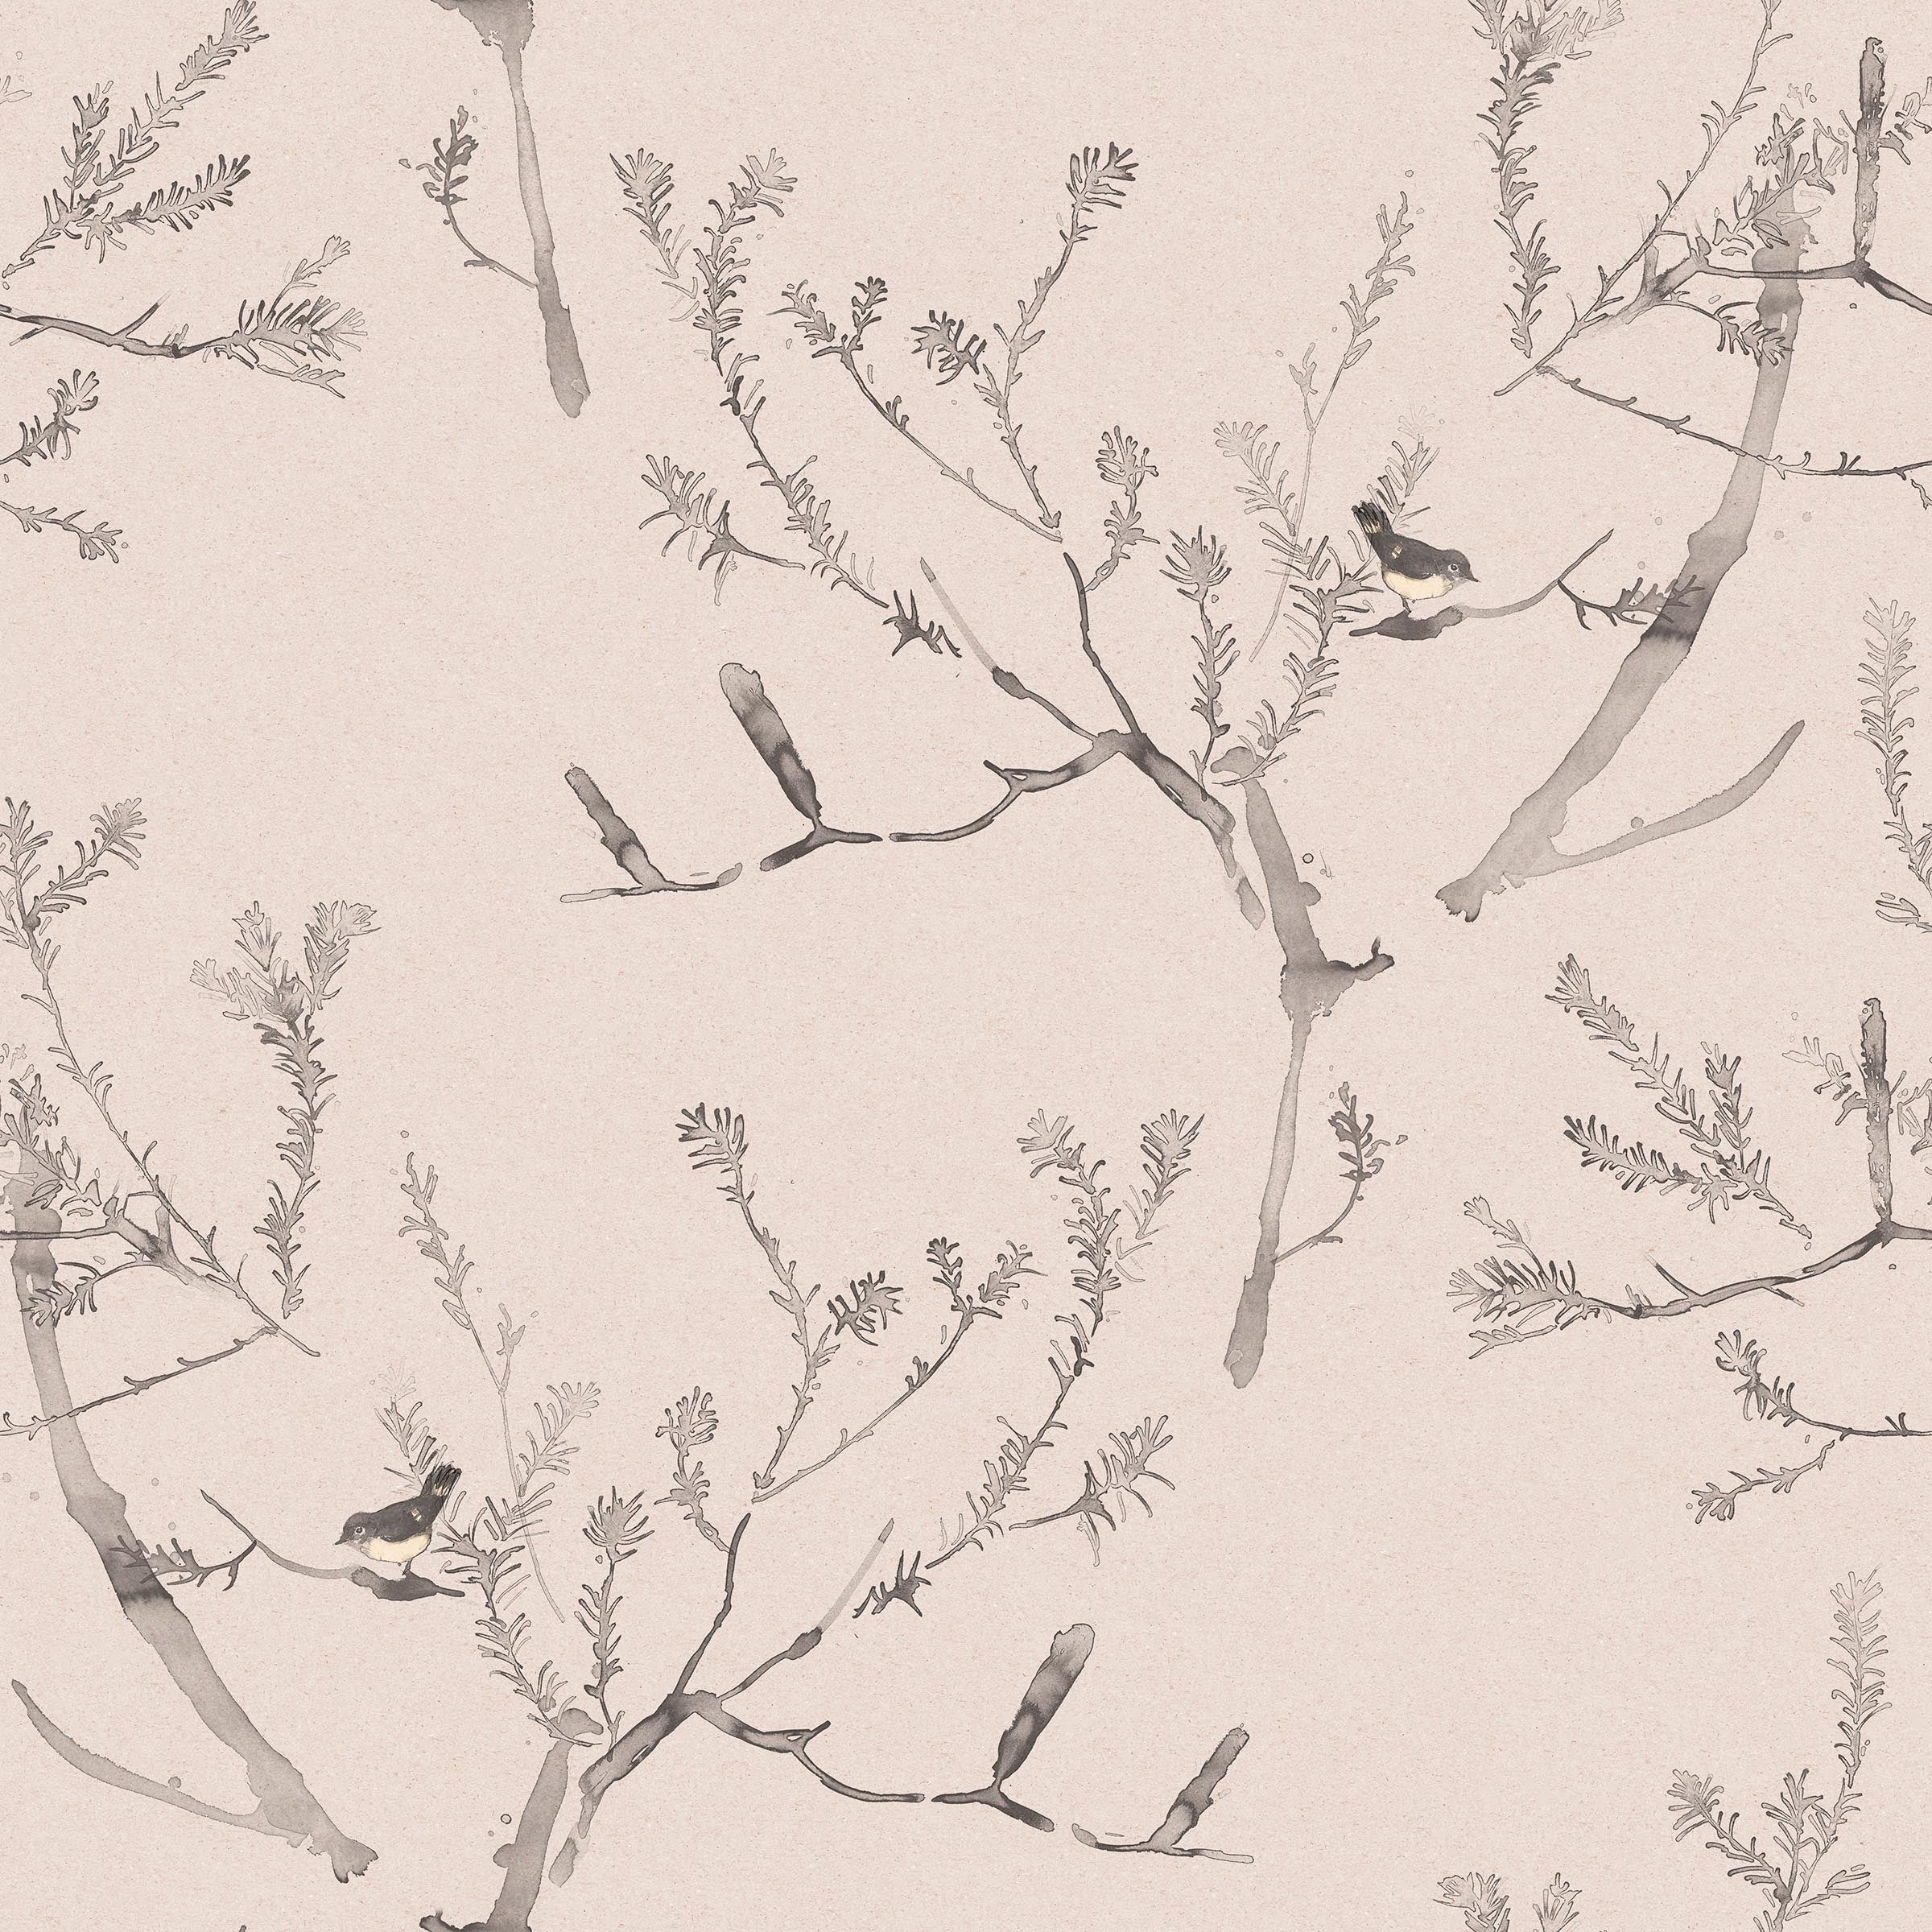 Detail of fabric in a painterly bird and branch pattern in shades of gray on a light pink field.